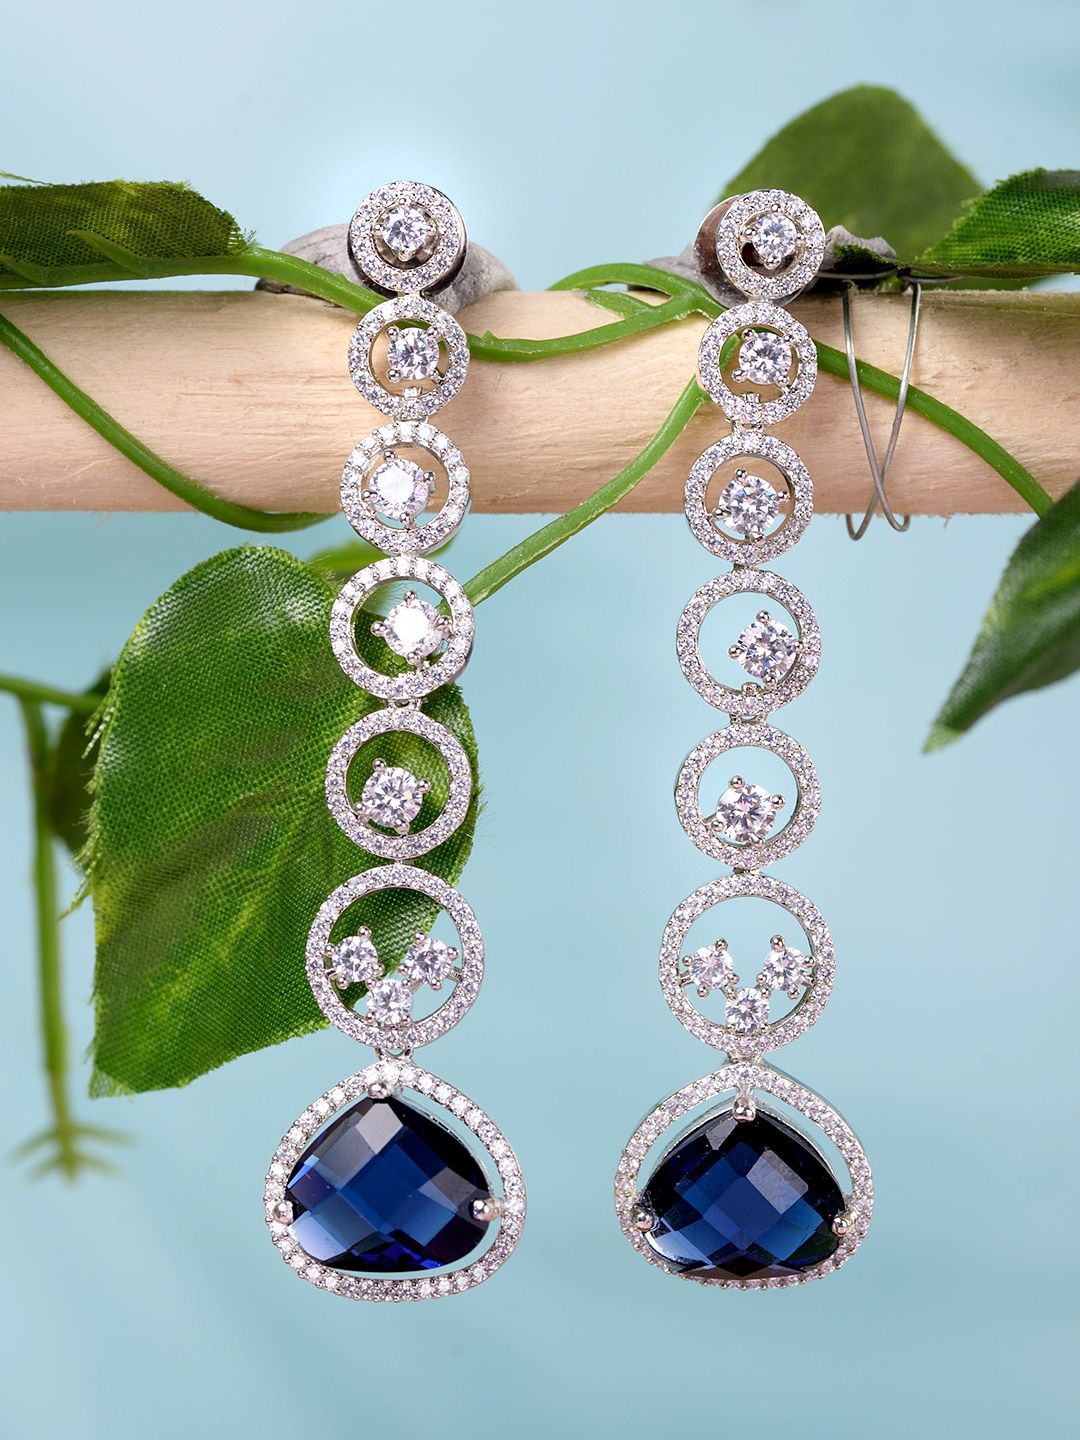 Saraf RS Jewellery Silver-Toned & Blue AD Studded Rhodium Plated Drop Earrings Price in India